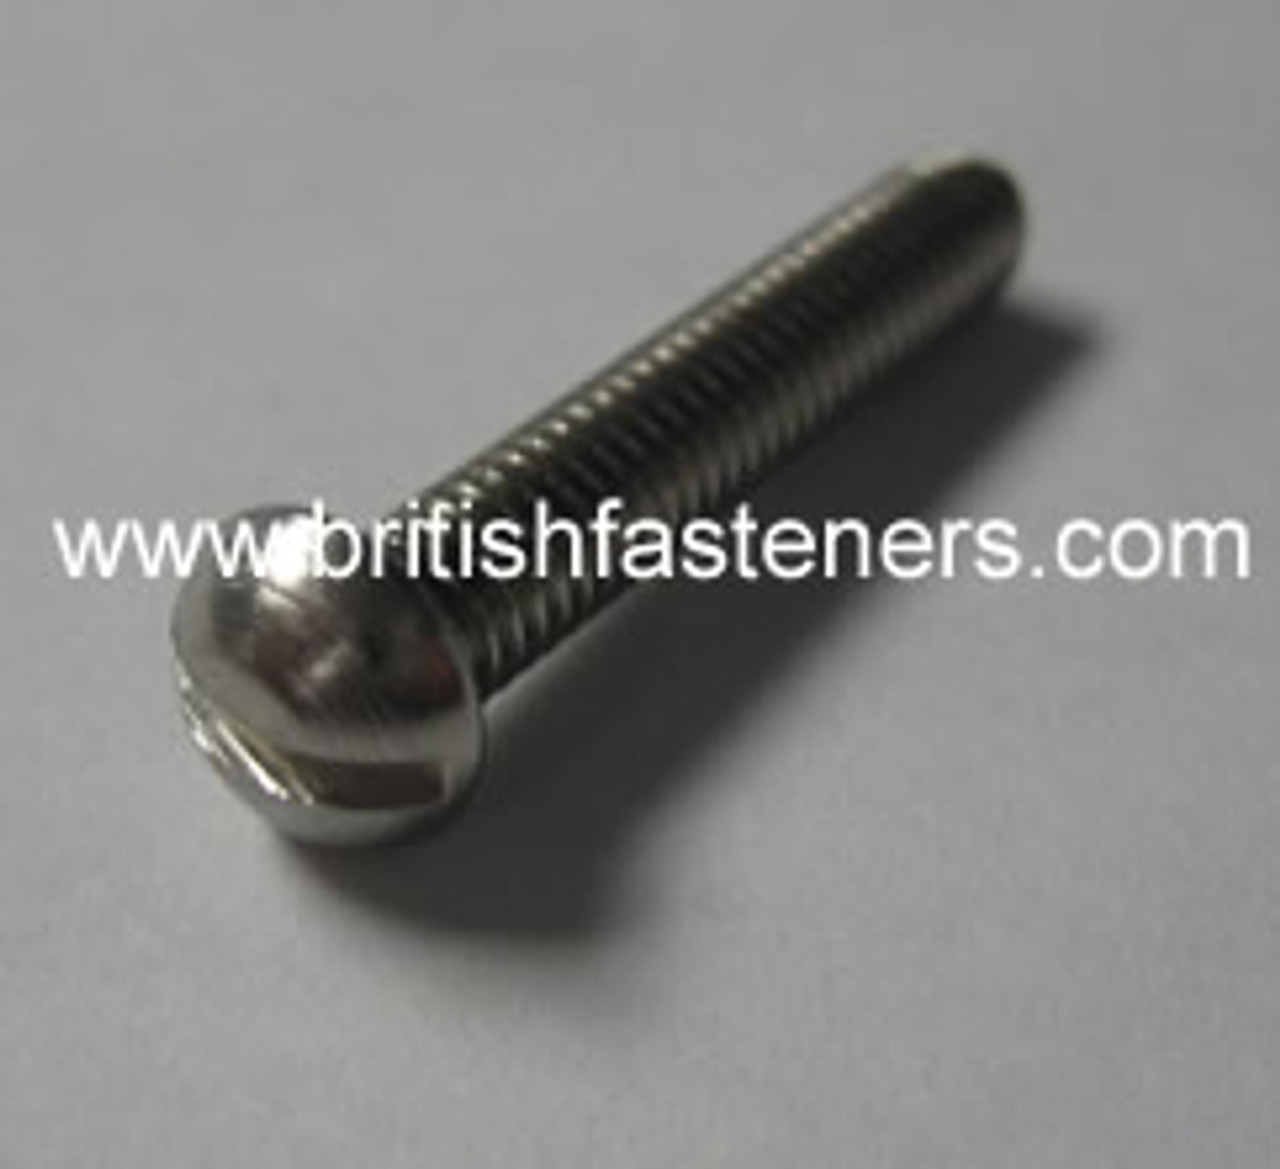 4BA x 1/2" ROUND SLOTTED SCREW S/S - (6682A)